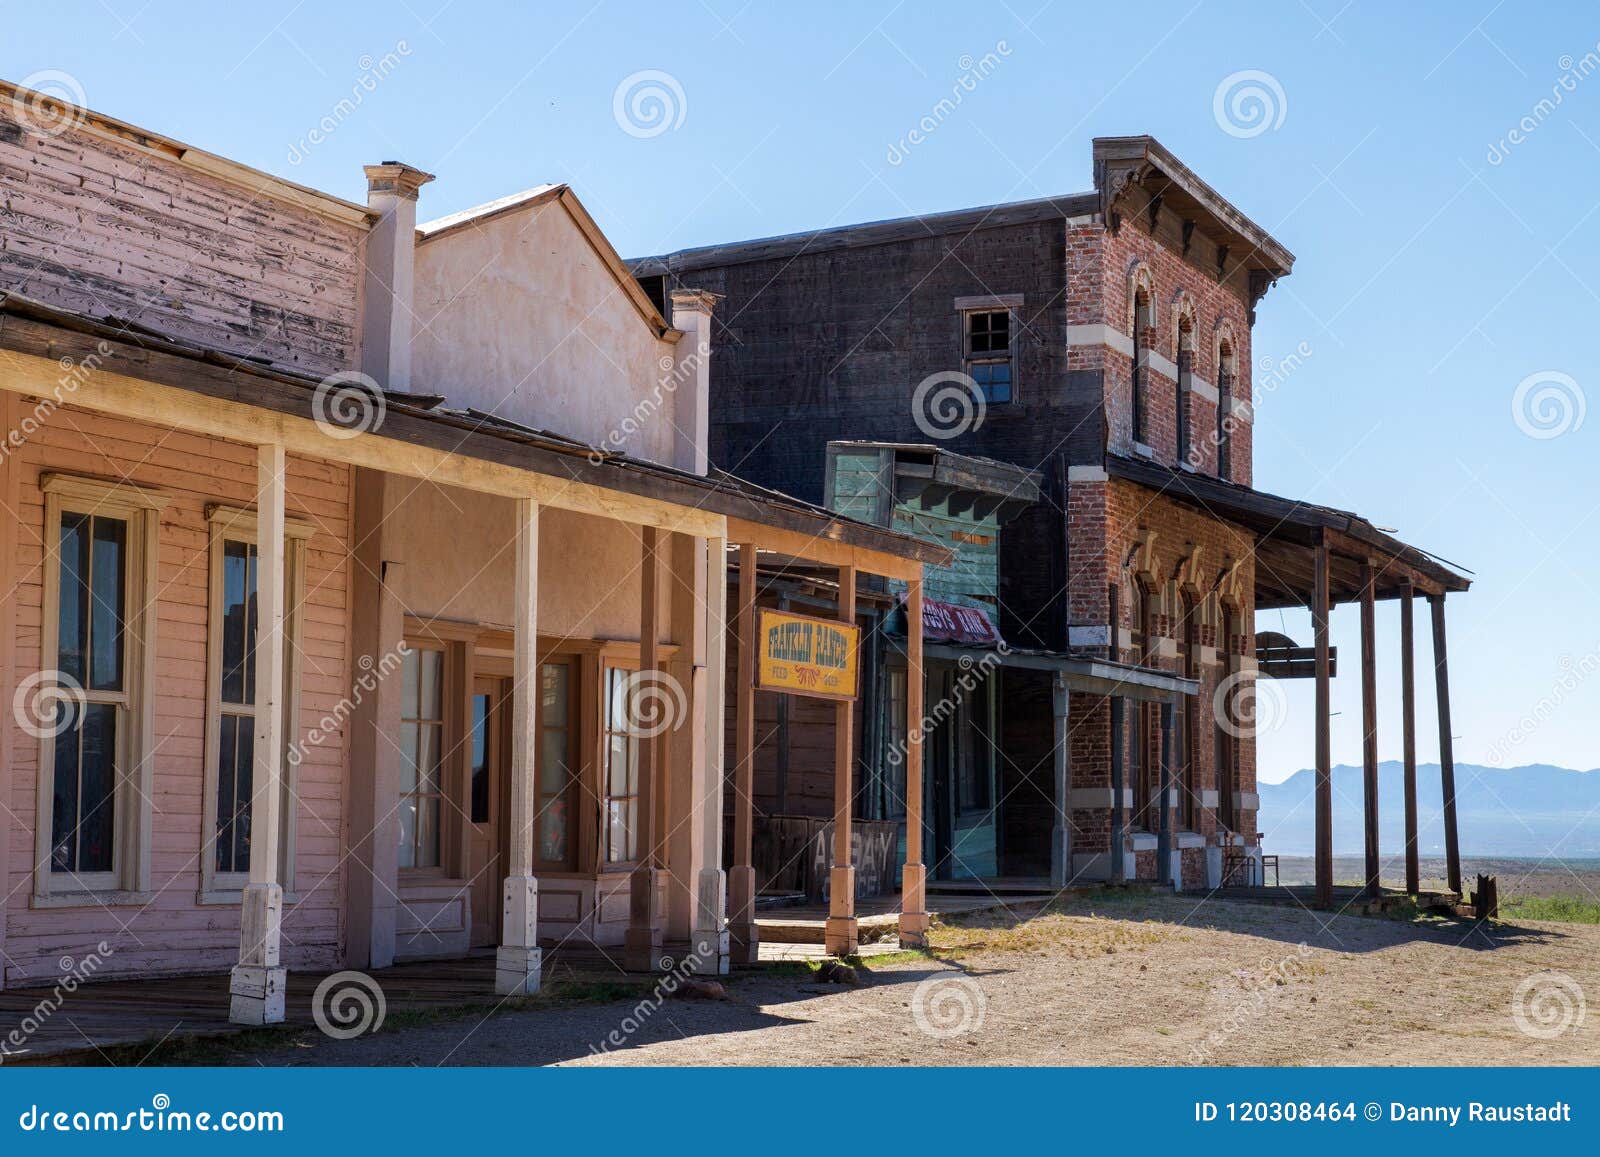 Old Wild West Town Movie Set In Mescal, Arizona Editorial Stock Image - Image of fifty ...